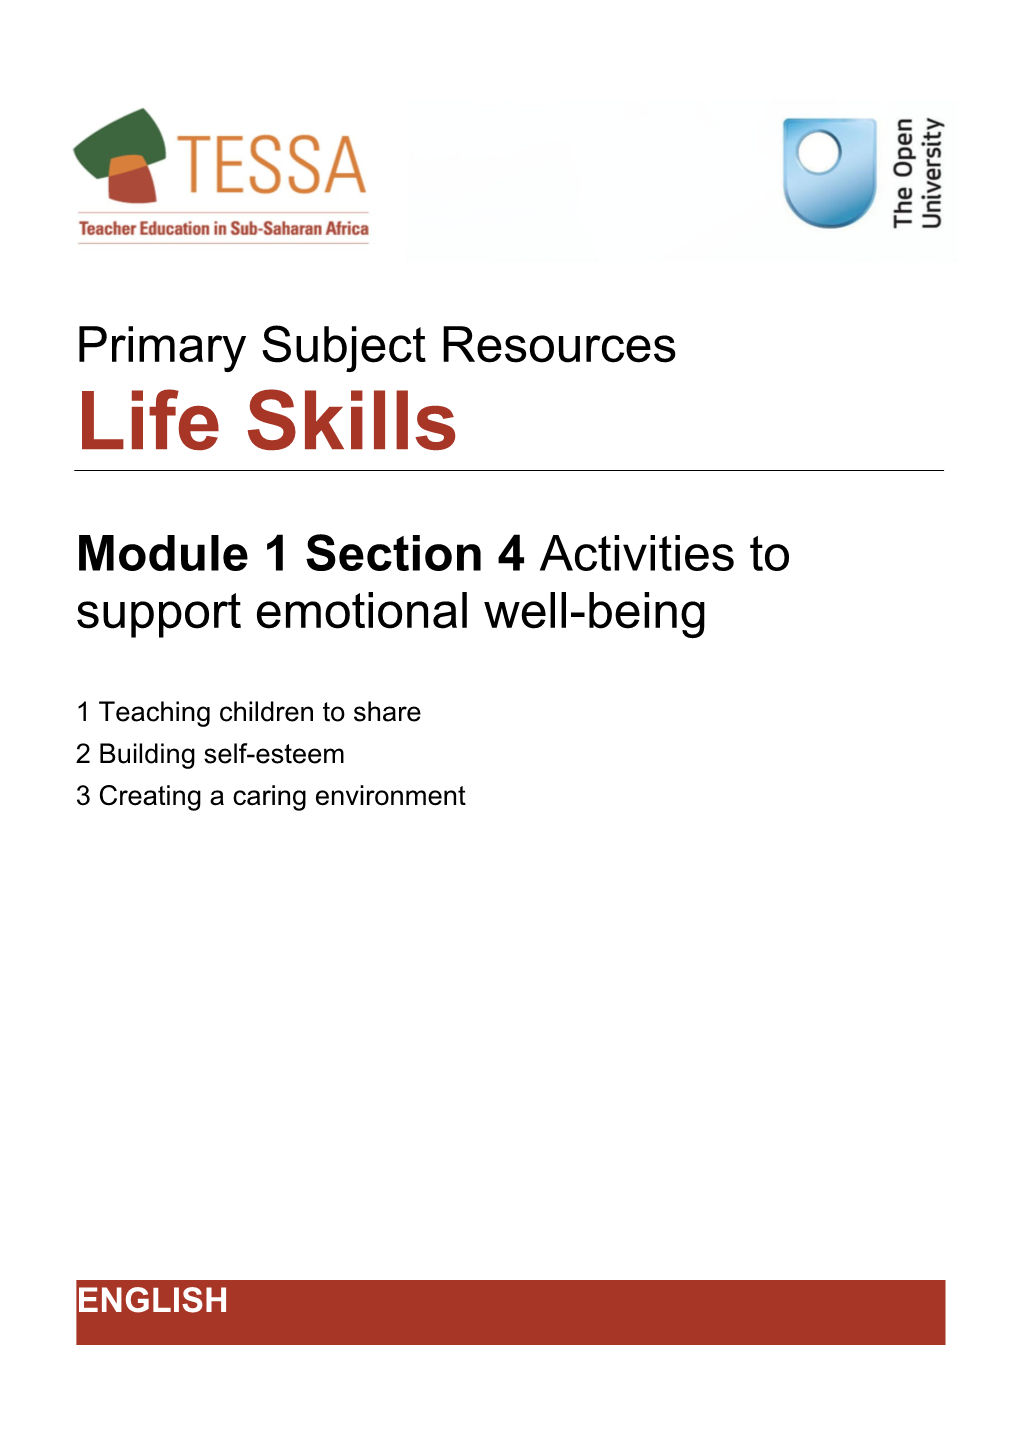 Section 4: Activities to Support Emotional Well-Being